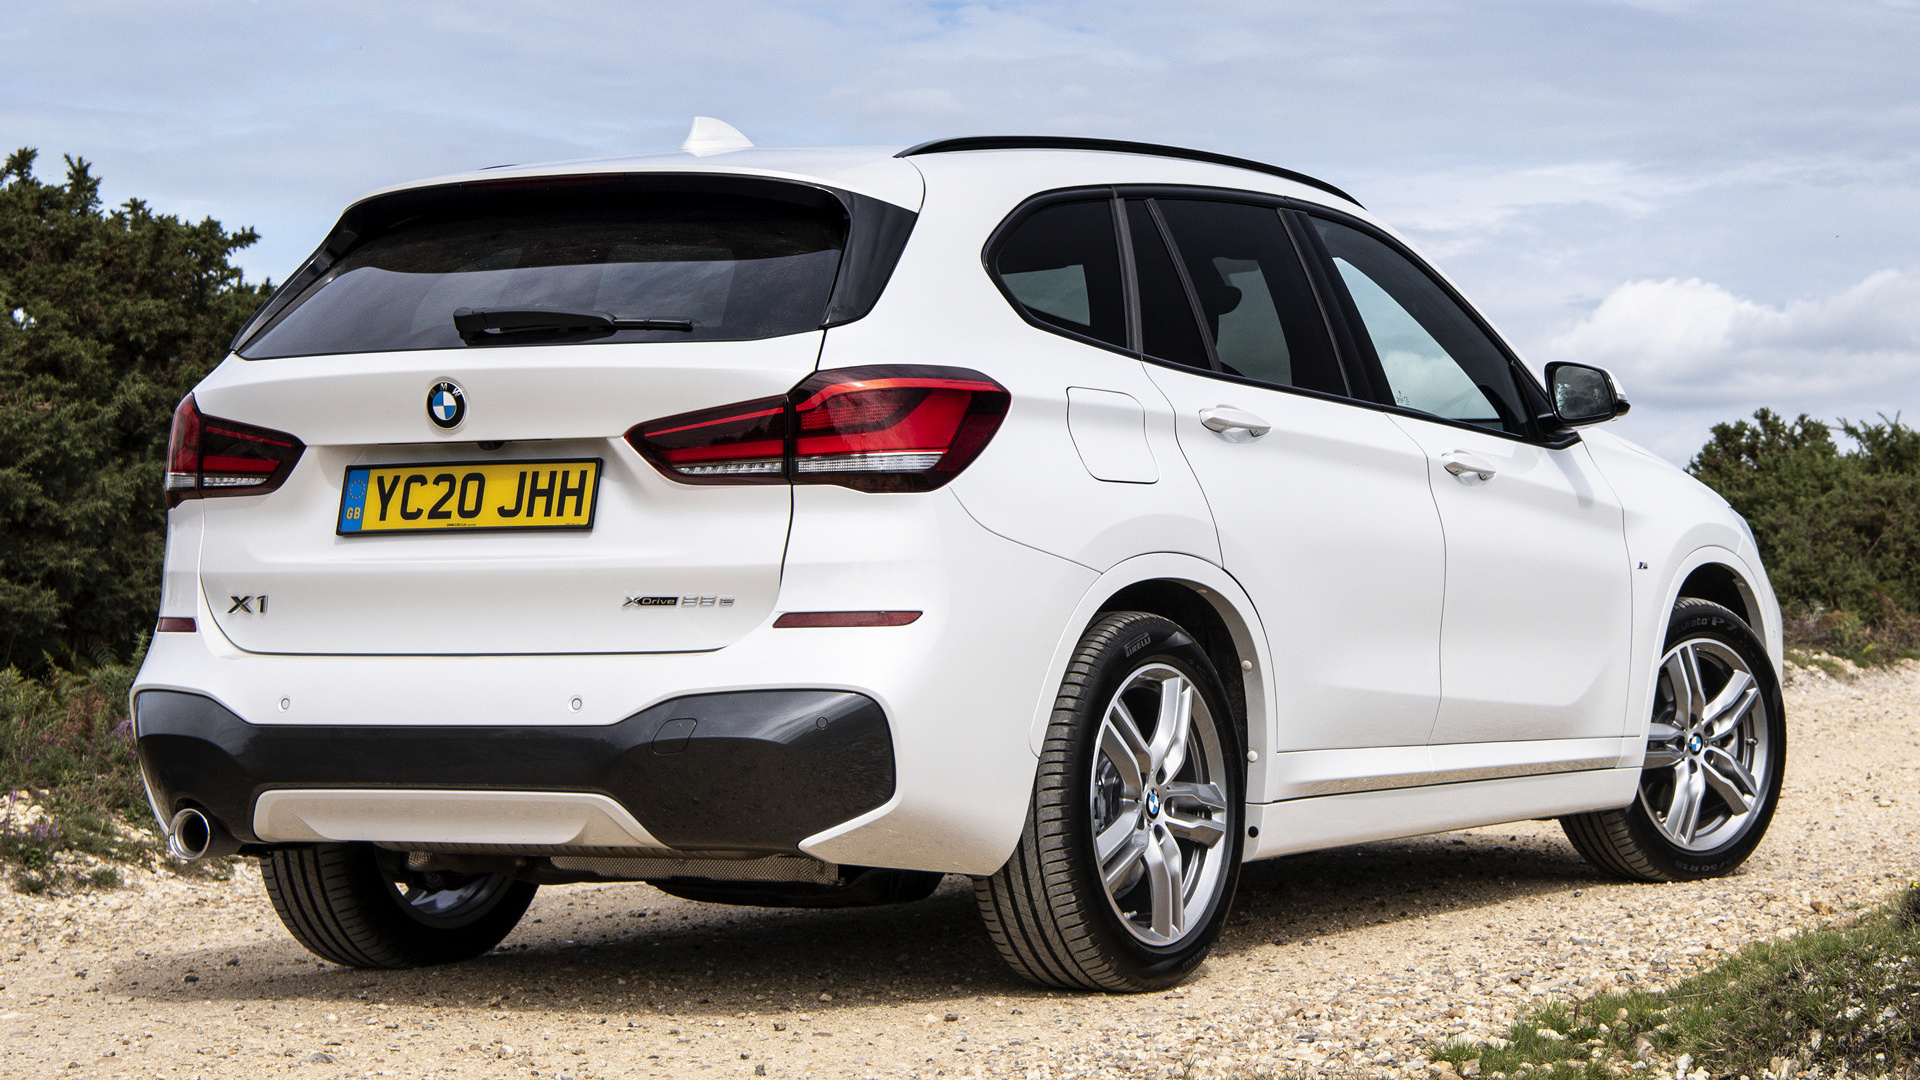 2020 BMW X1 Plug-In Hybrid M Sport (UK) - Wallpapers and HD Images